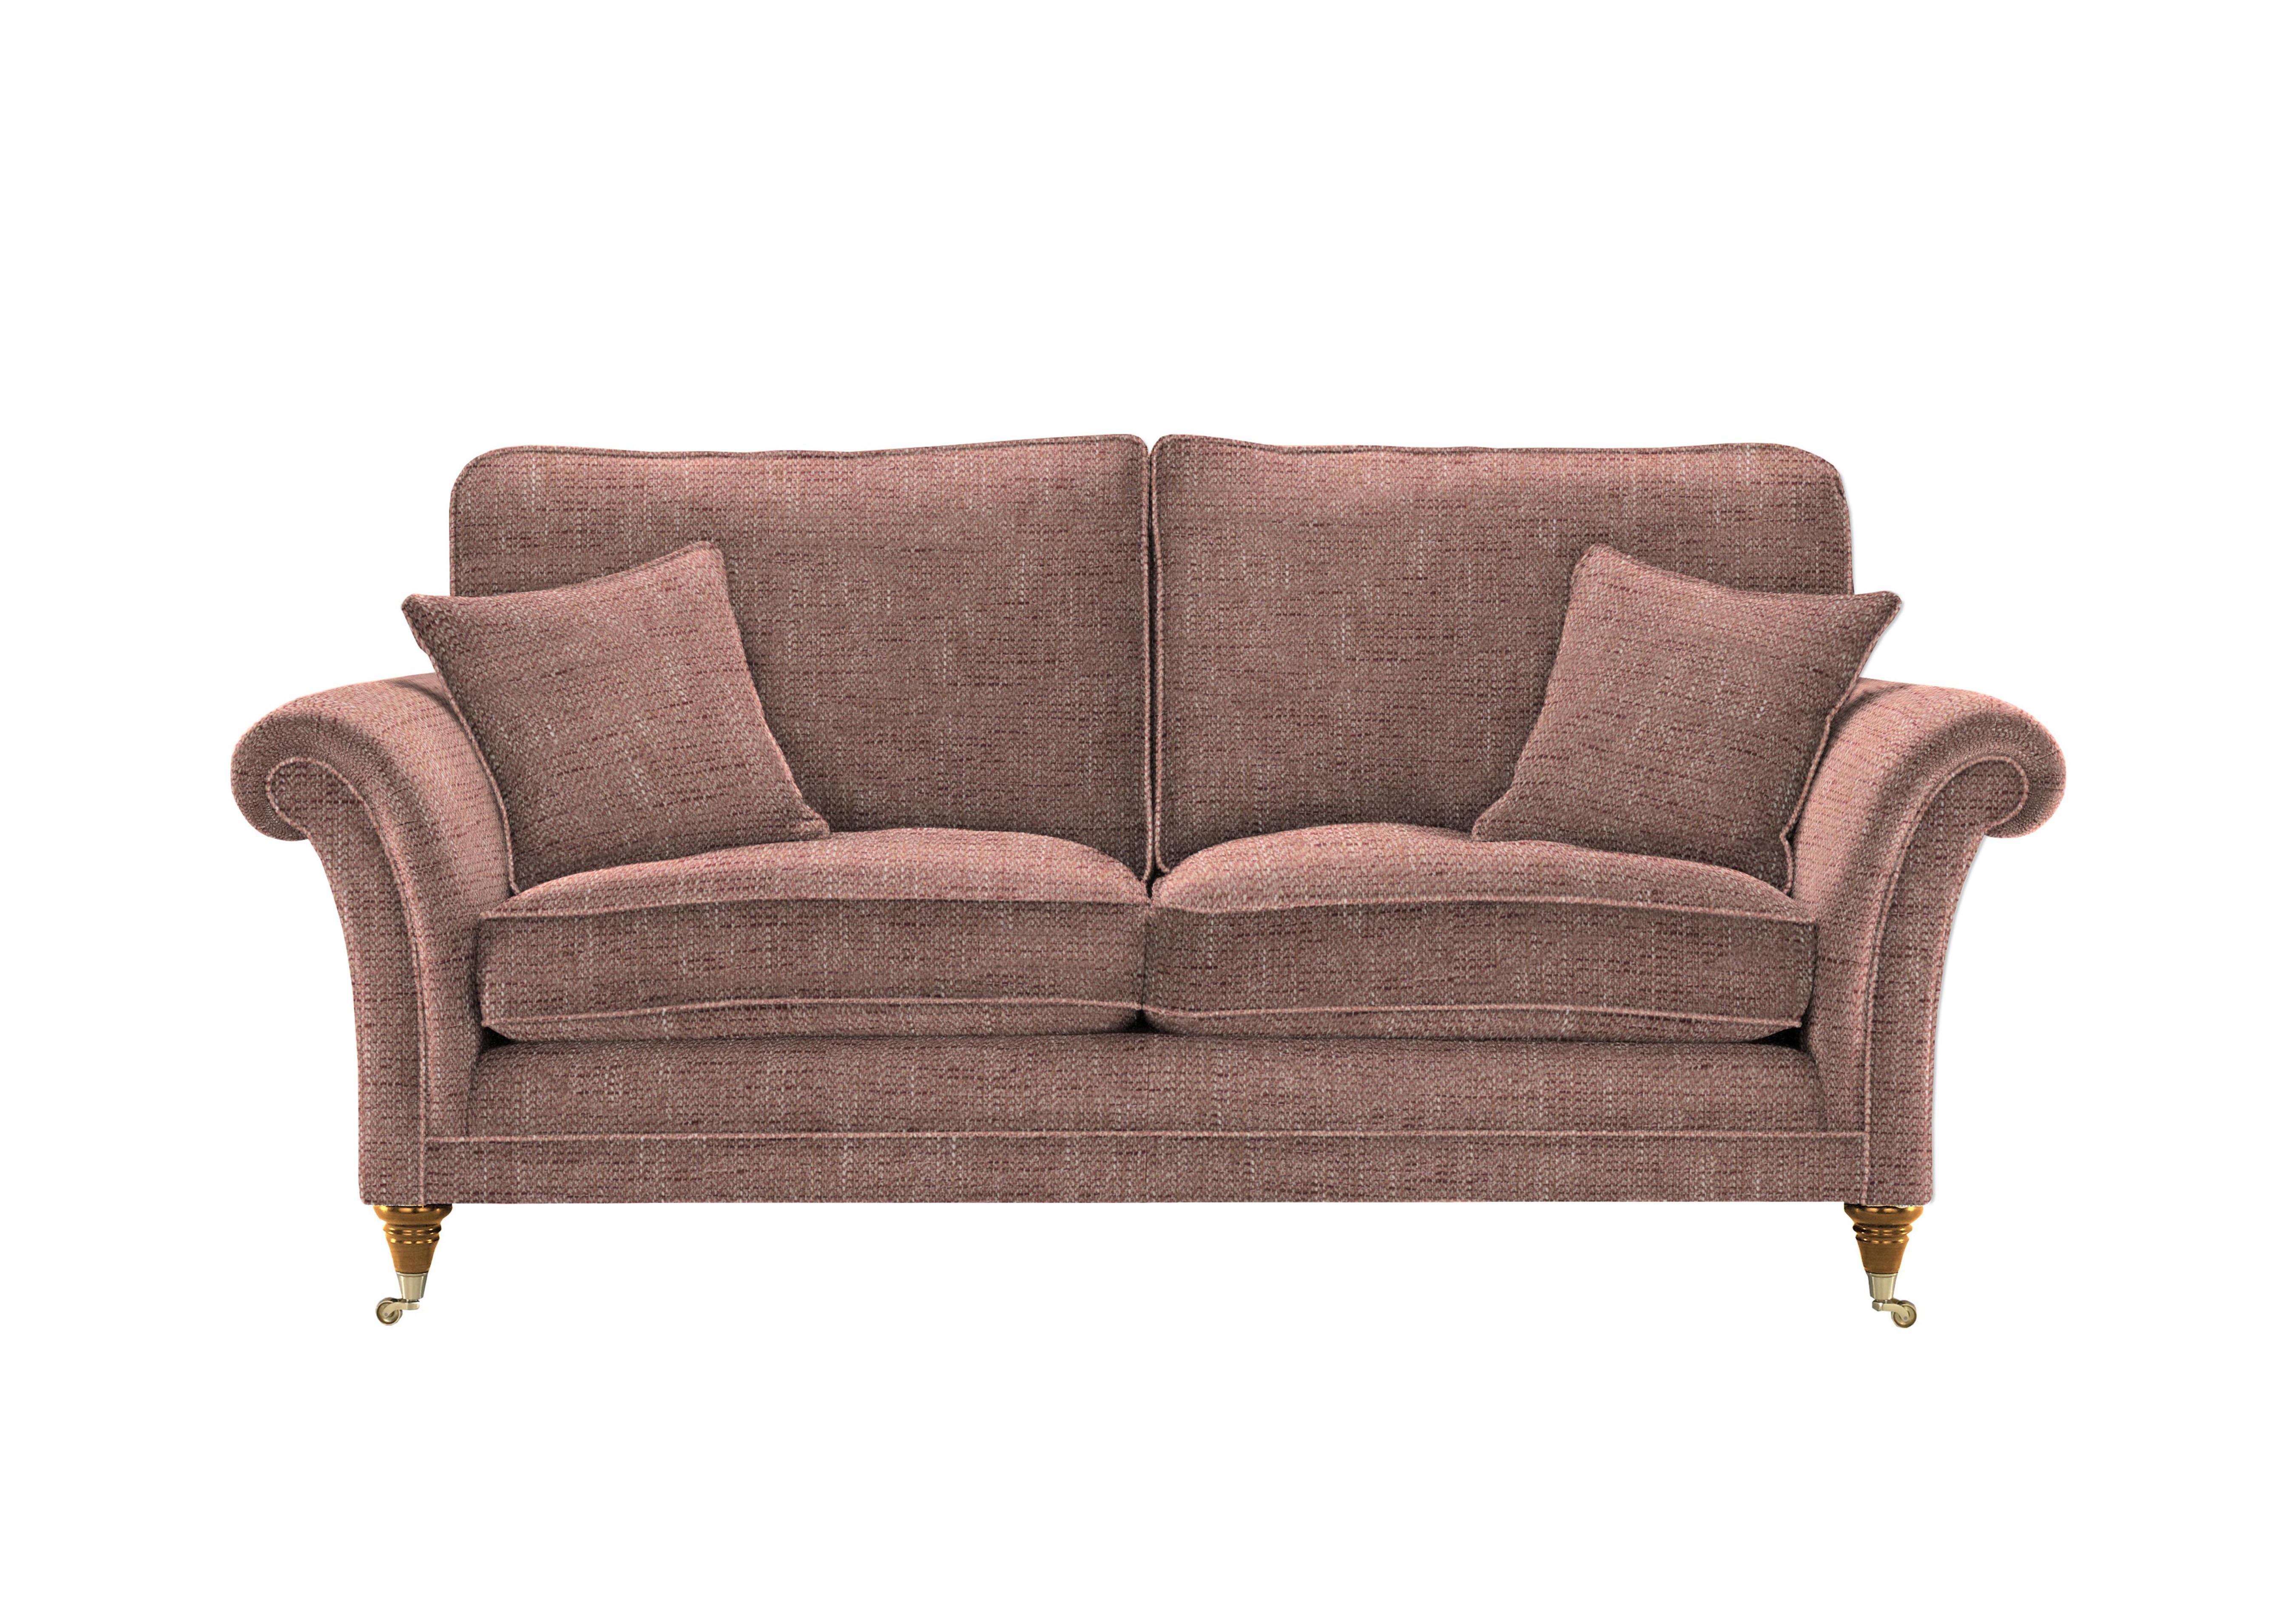 Burghley Large 2 Seater Fabric Sofa in 001408-0003 Country Rose on Furniture Village